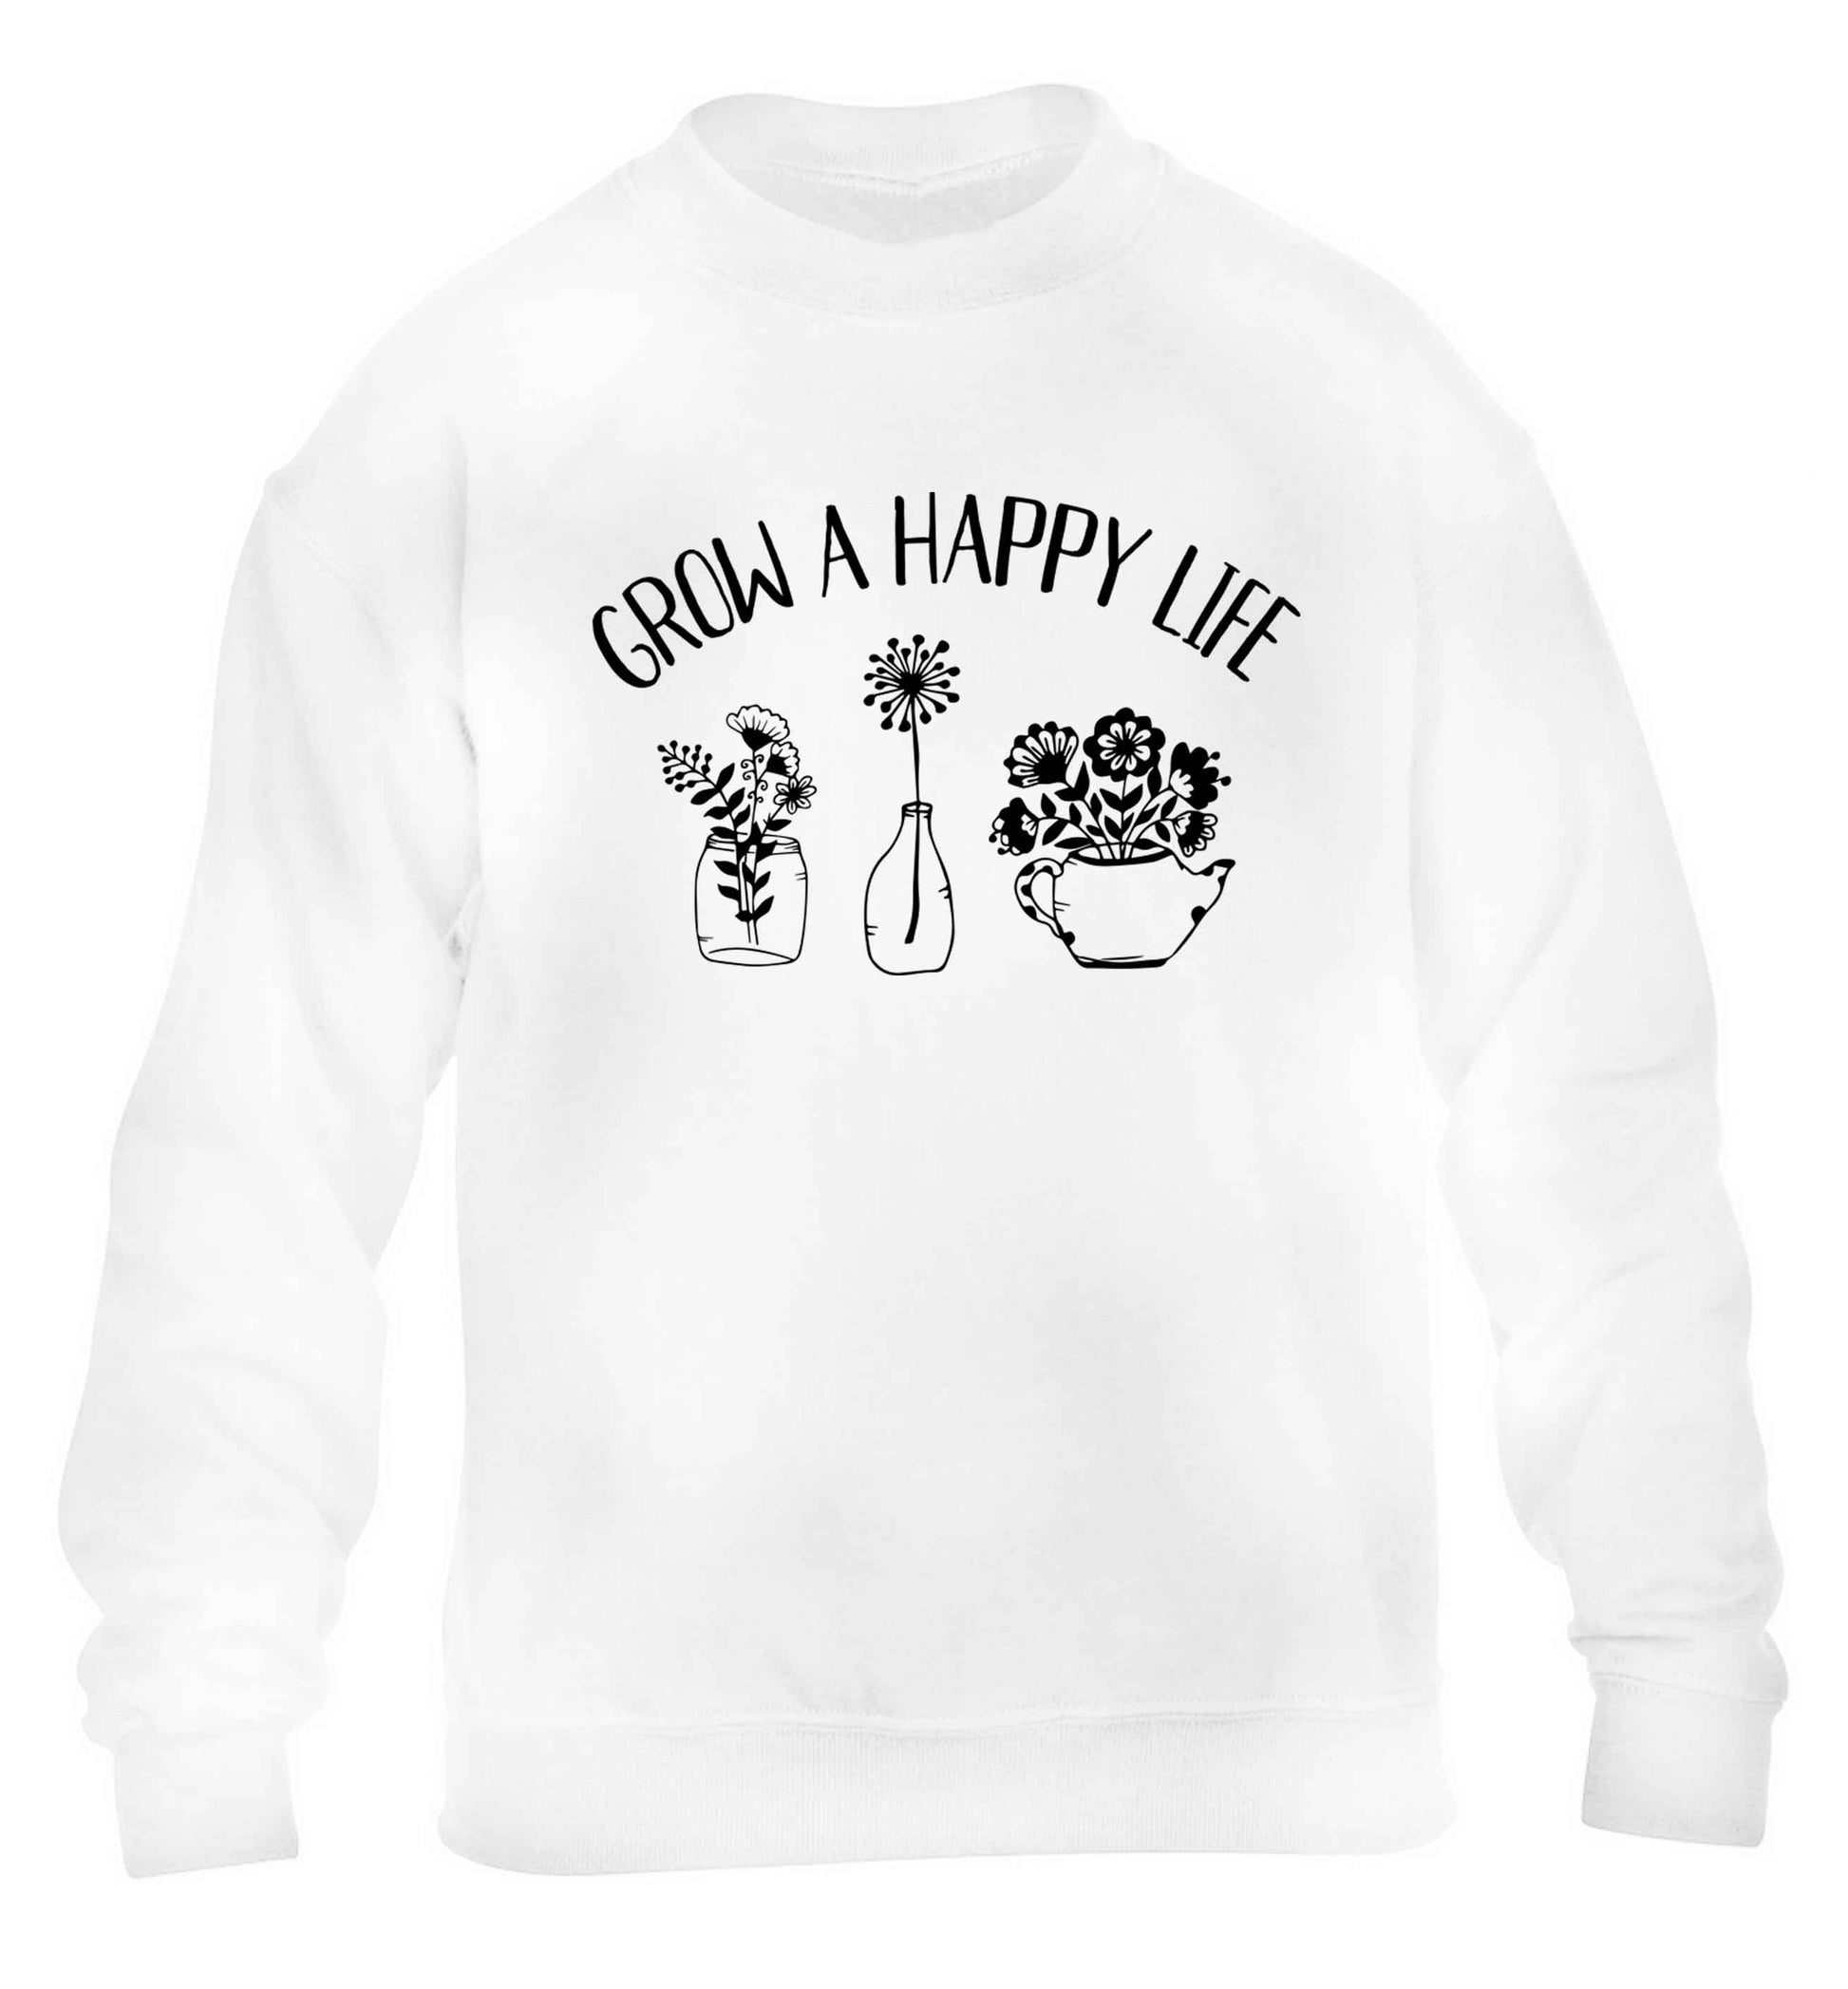 Grow a happy life children's white sweater 12-13 Years